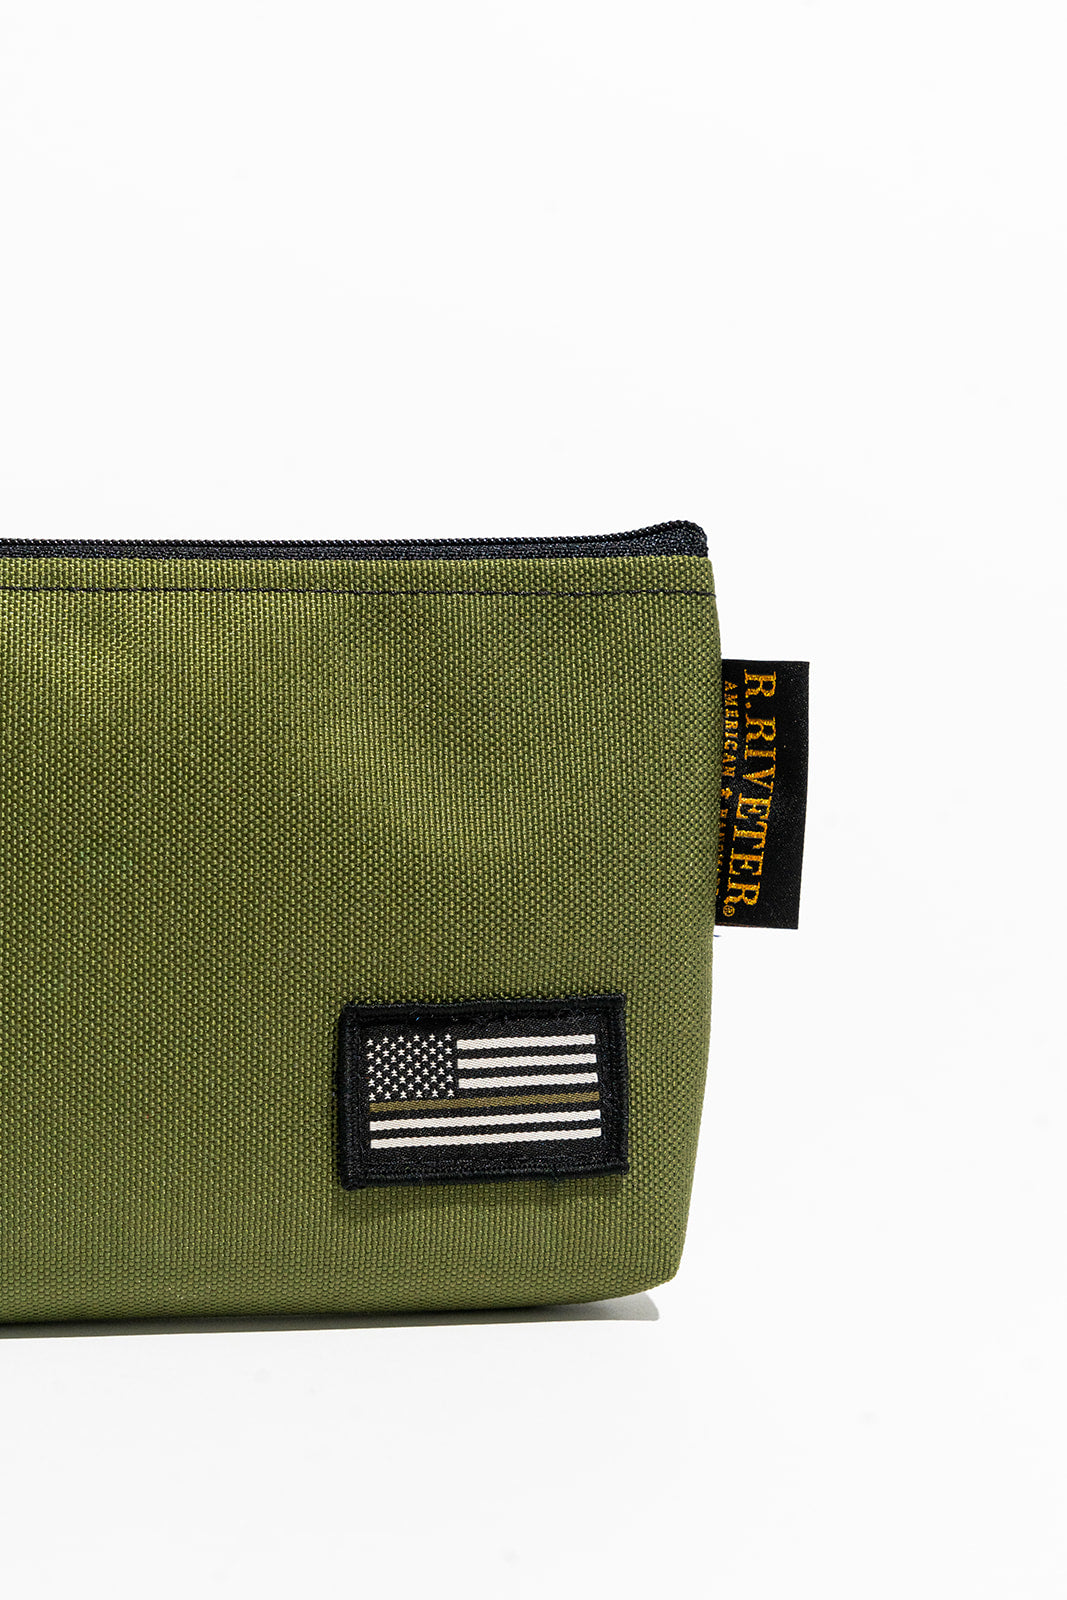 Lucy | Fatigue Textured Nylon - Armed Forces Thin Green Line